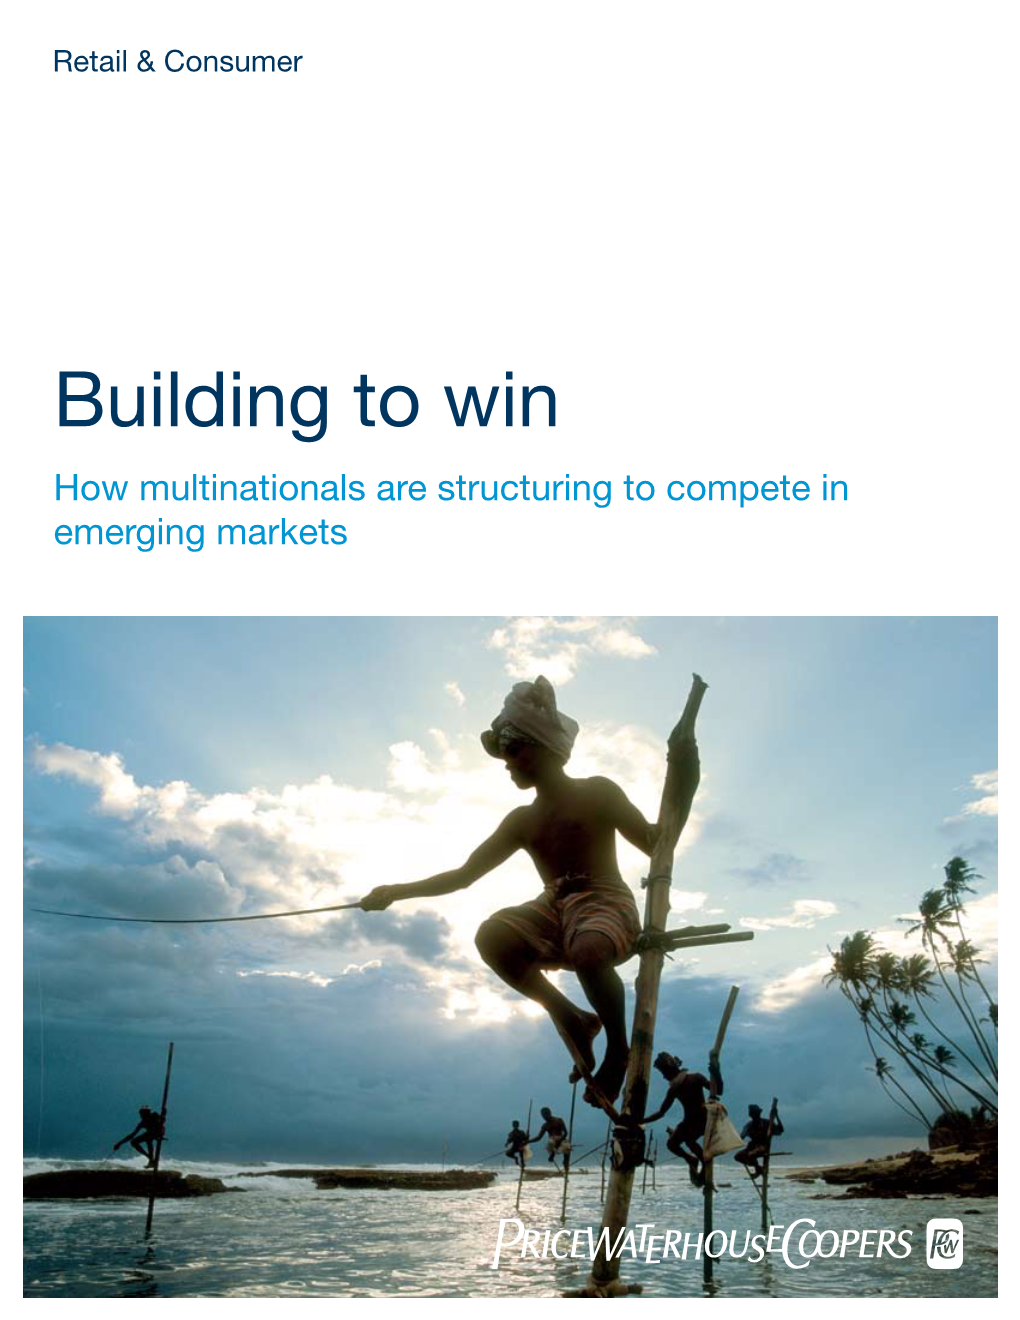 Building to Win How Multinationals Are Structuring to Compete in Emerging Markets